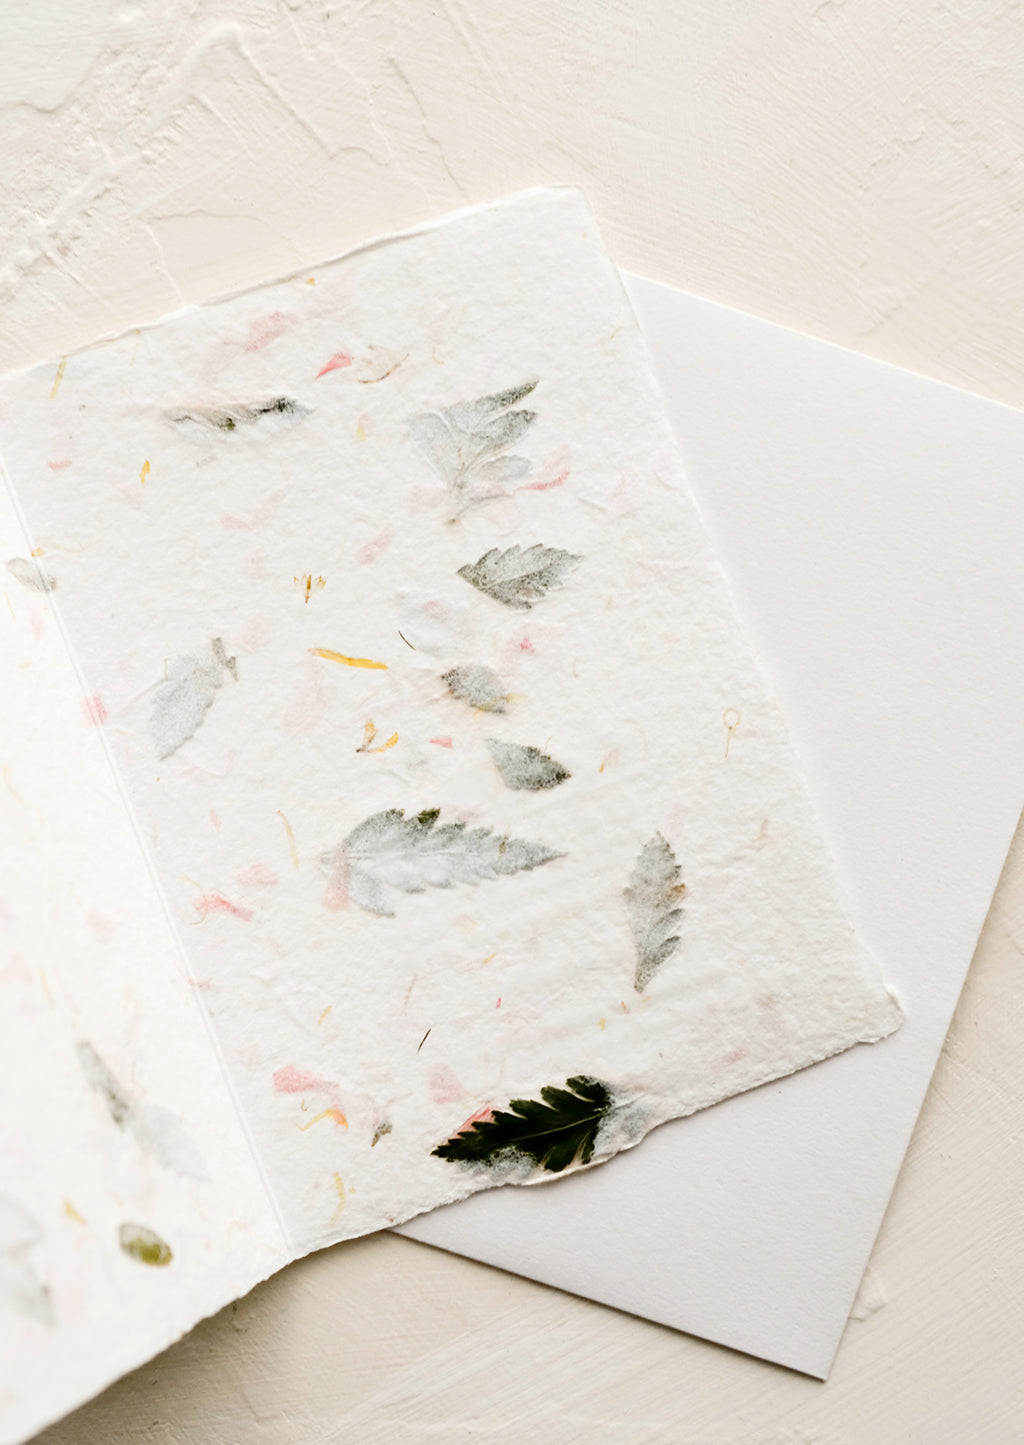 2: The blank inside of a greeting card made from handmade flower petal paper.